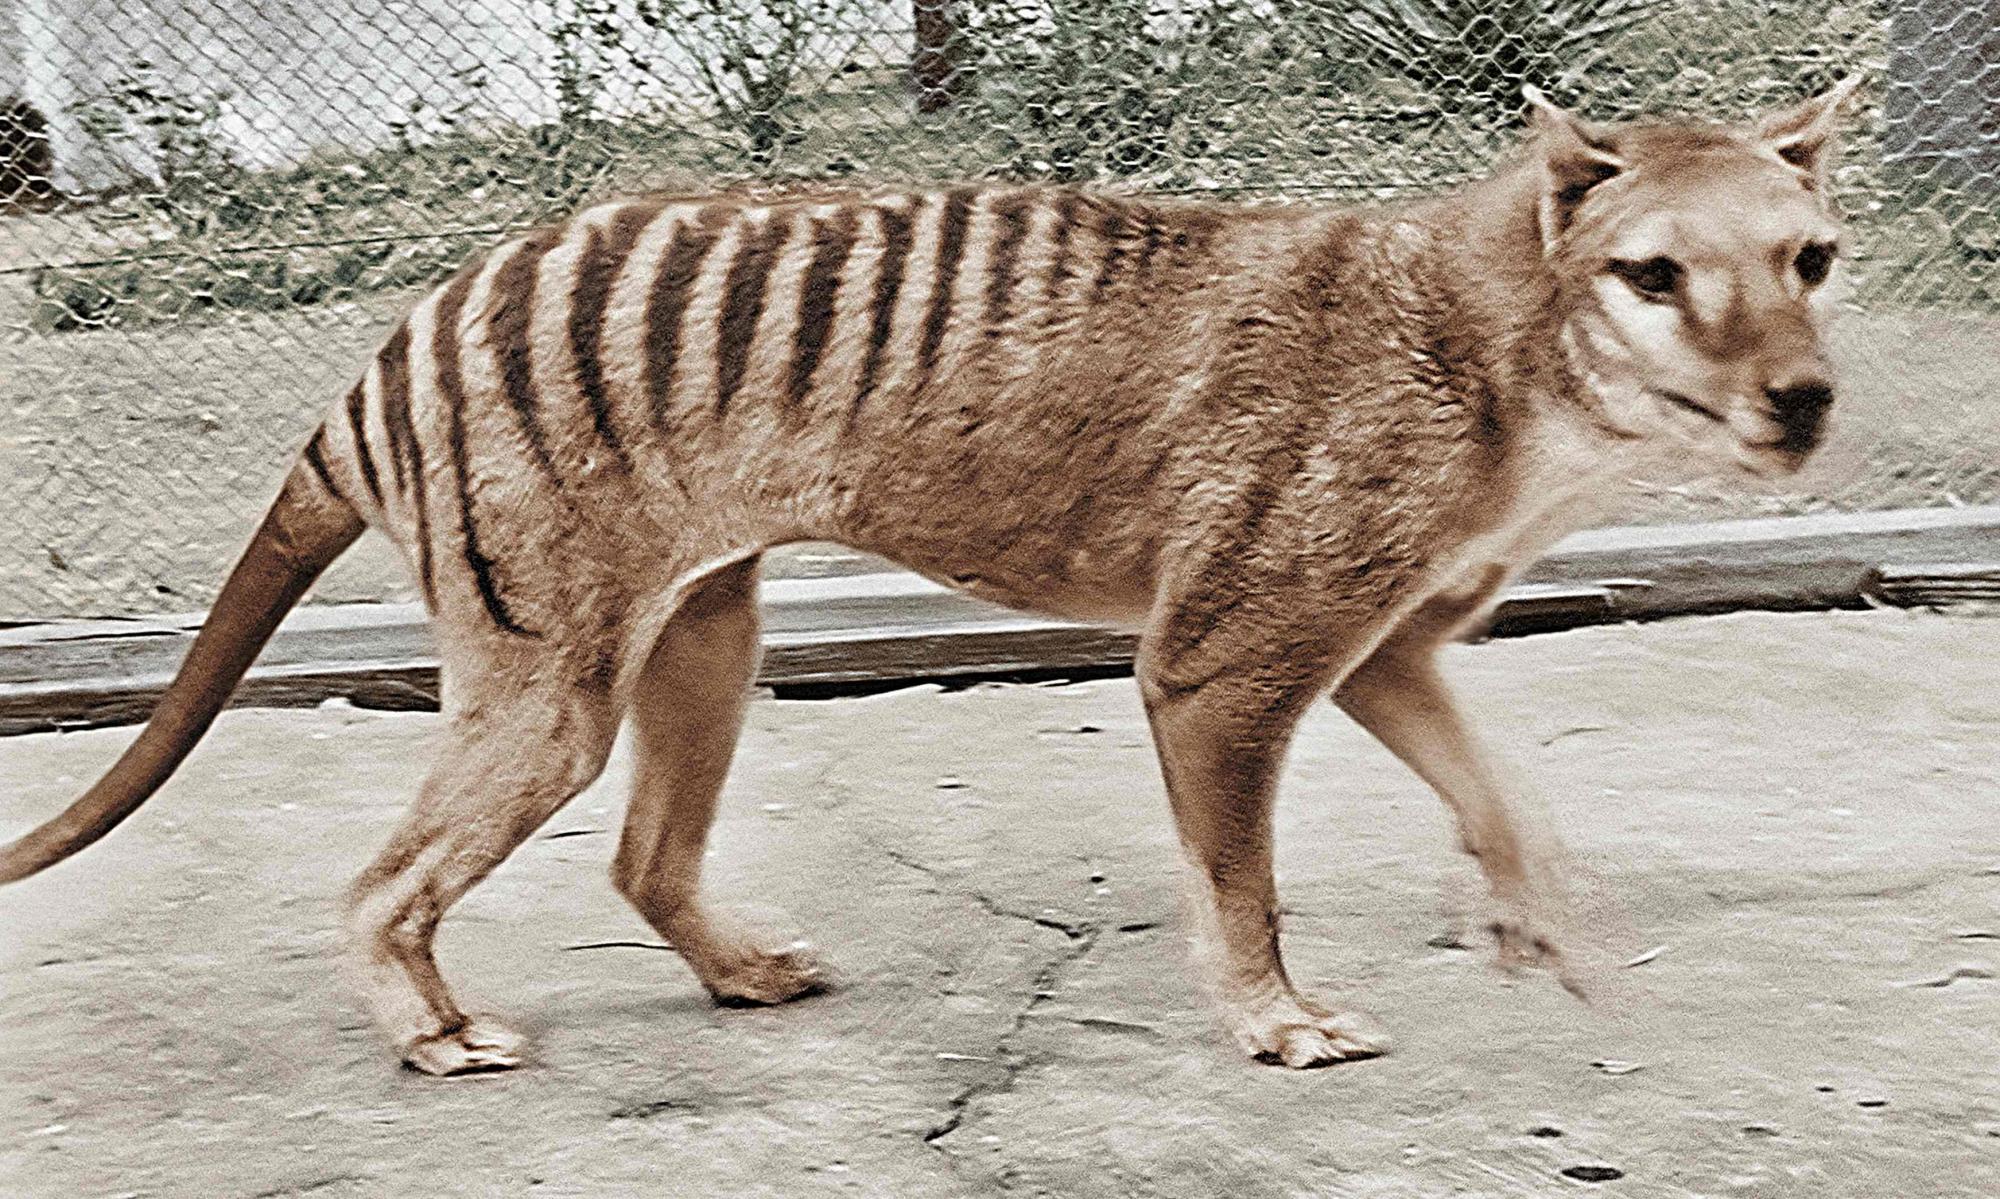 Resurrecting the Tasmanian tiger may be a noble idea – but what about preserving existing species? | Adam Morton